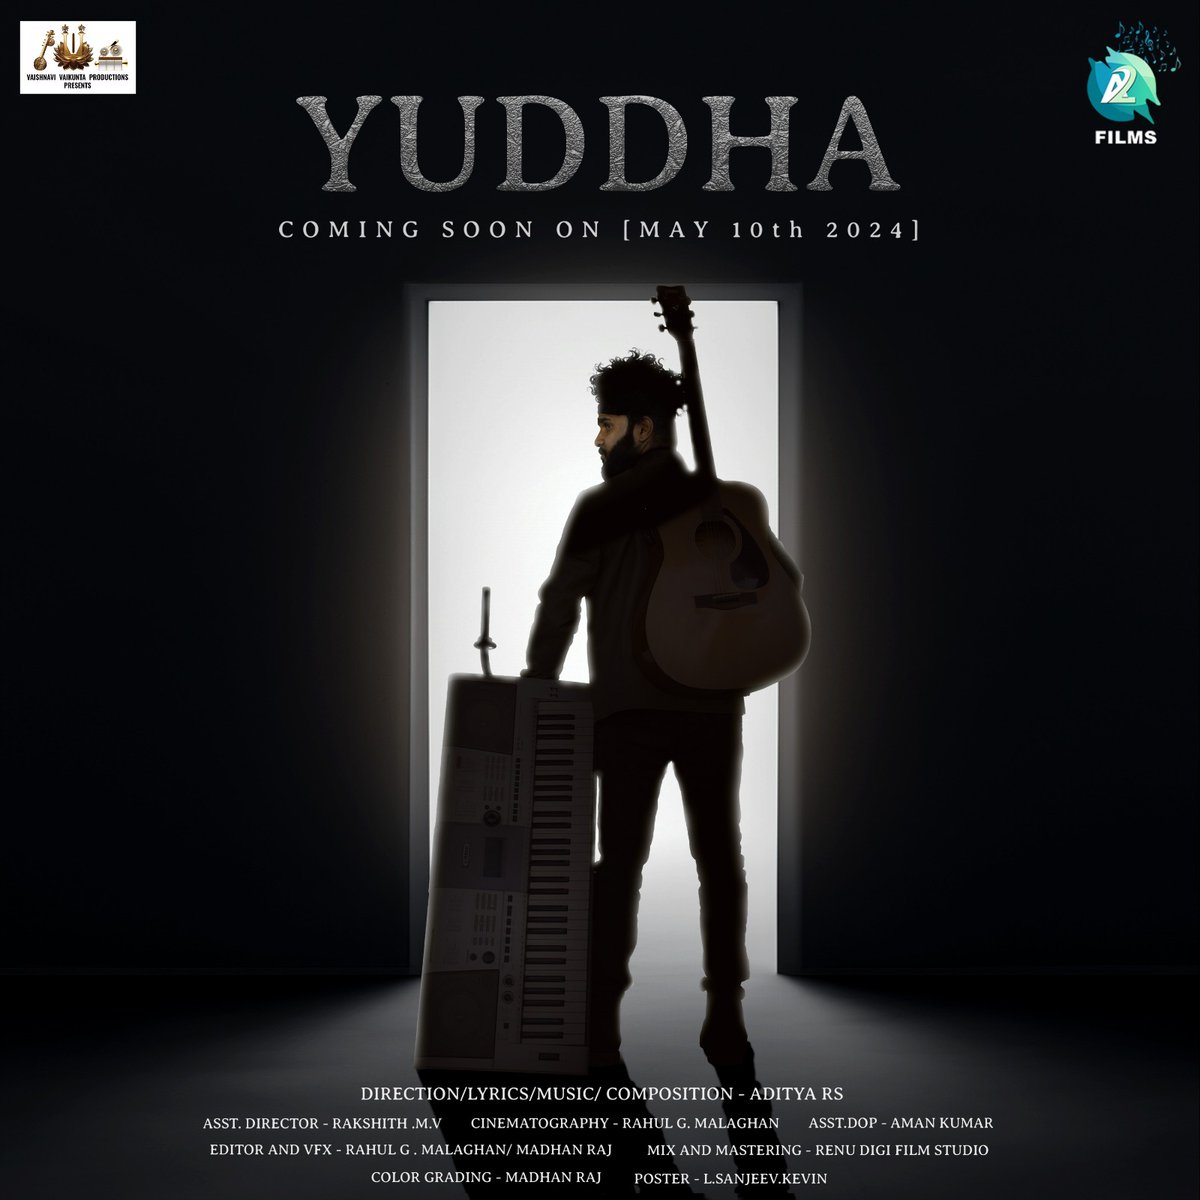 Get ready to dive into the epic battle of emotions and melodies! 🎶 'Yuddha', our latest Kannada album song, is set to conquer your hearts on May 10th, exclusively on A2 Films. 

#Yuddha #NewRelease #KannadaMusic #A2Films #KannadaAlbumSongs